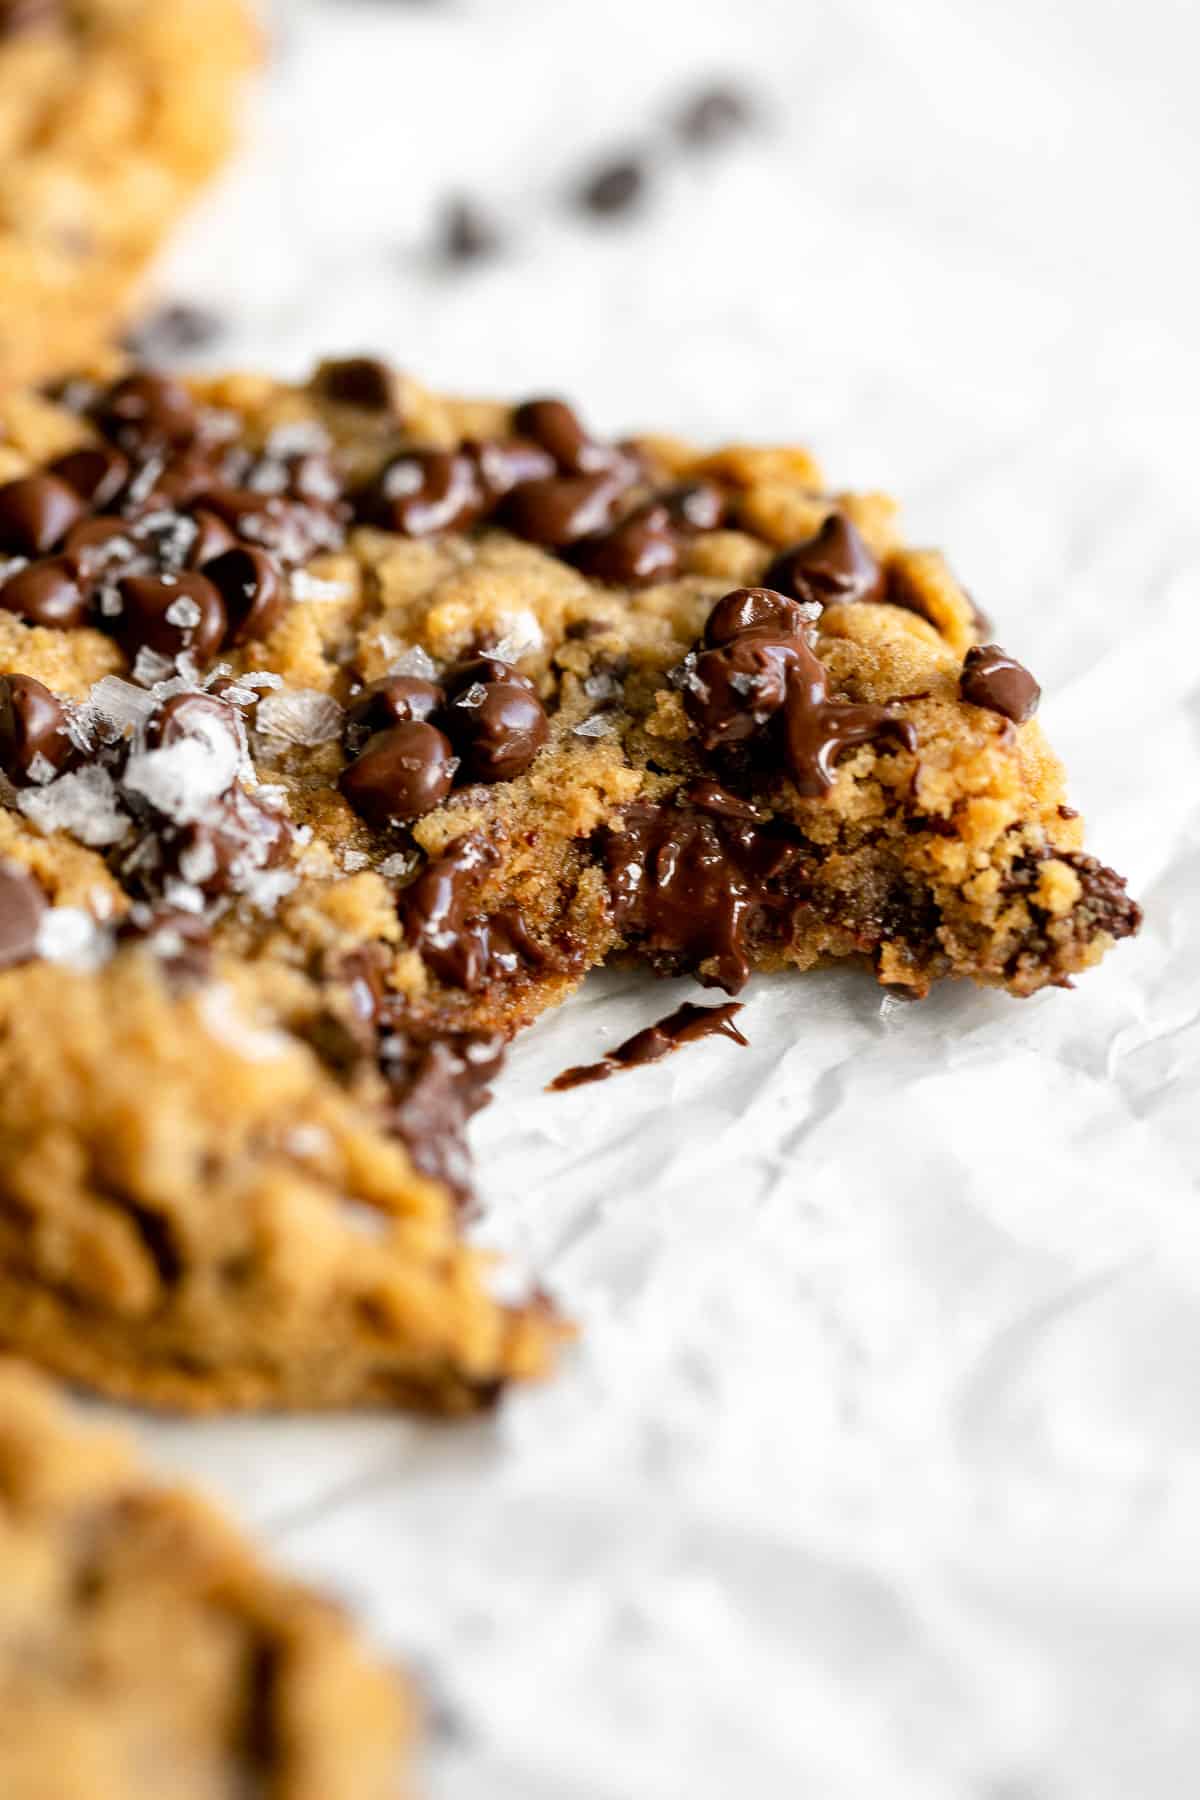 up close image of the cookie with a bite taken out